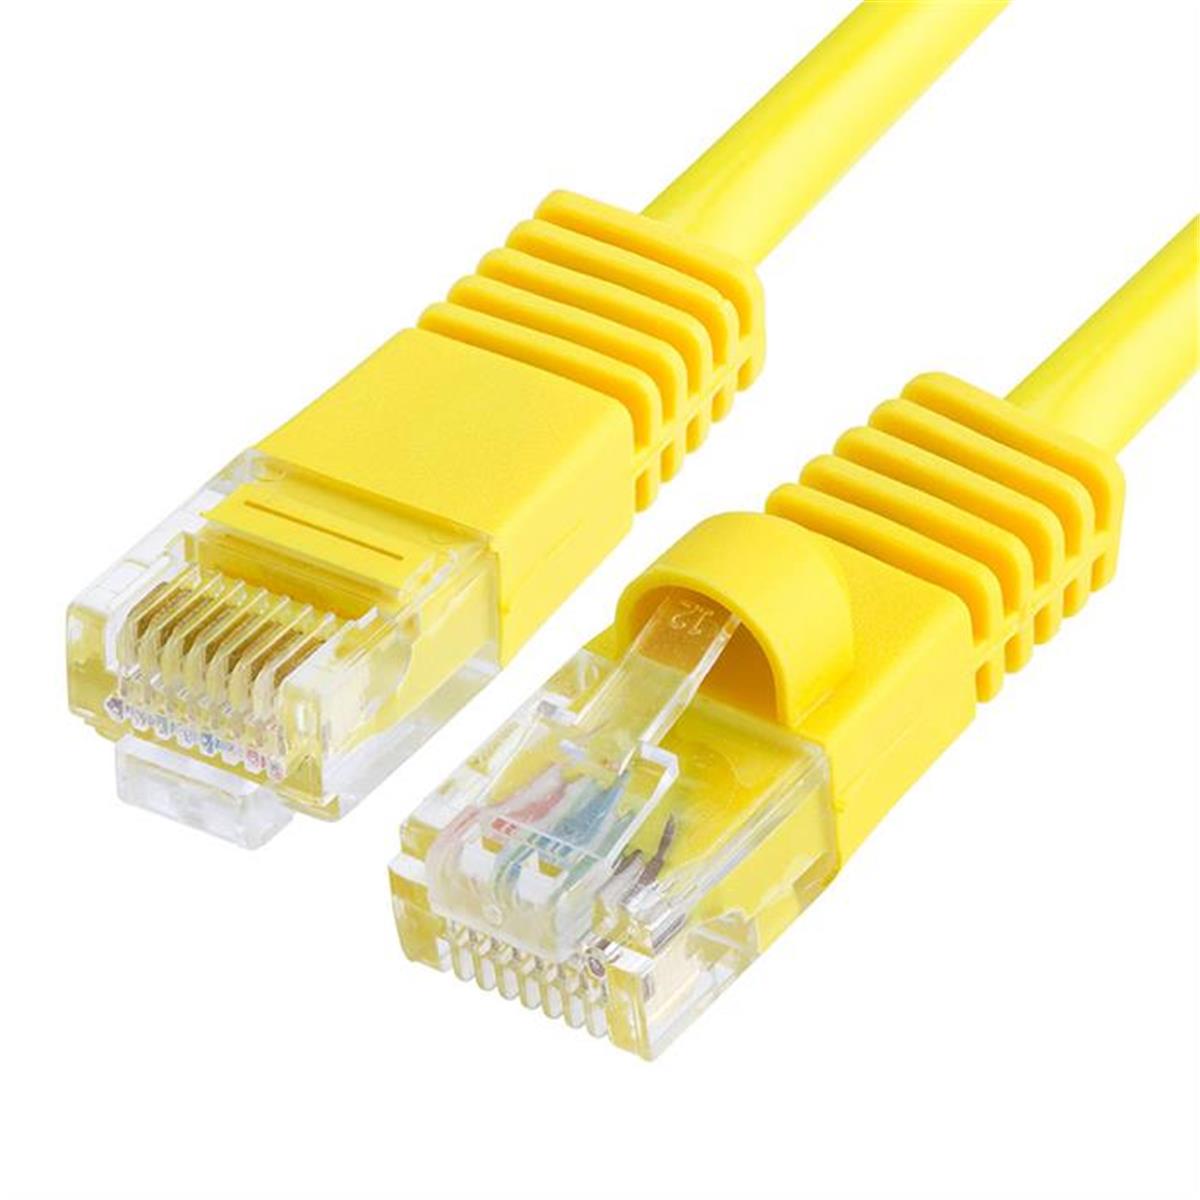 874-n 350 Mhz Rj45 Cat5e Ethernet Network Patch Cable - 10 Ft. - Yellow